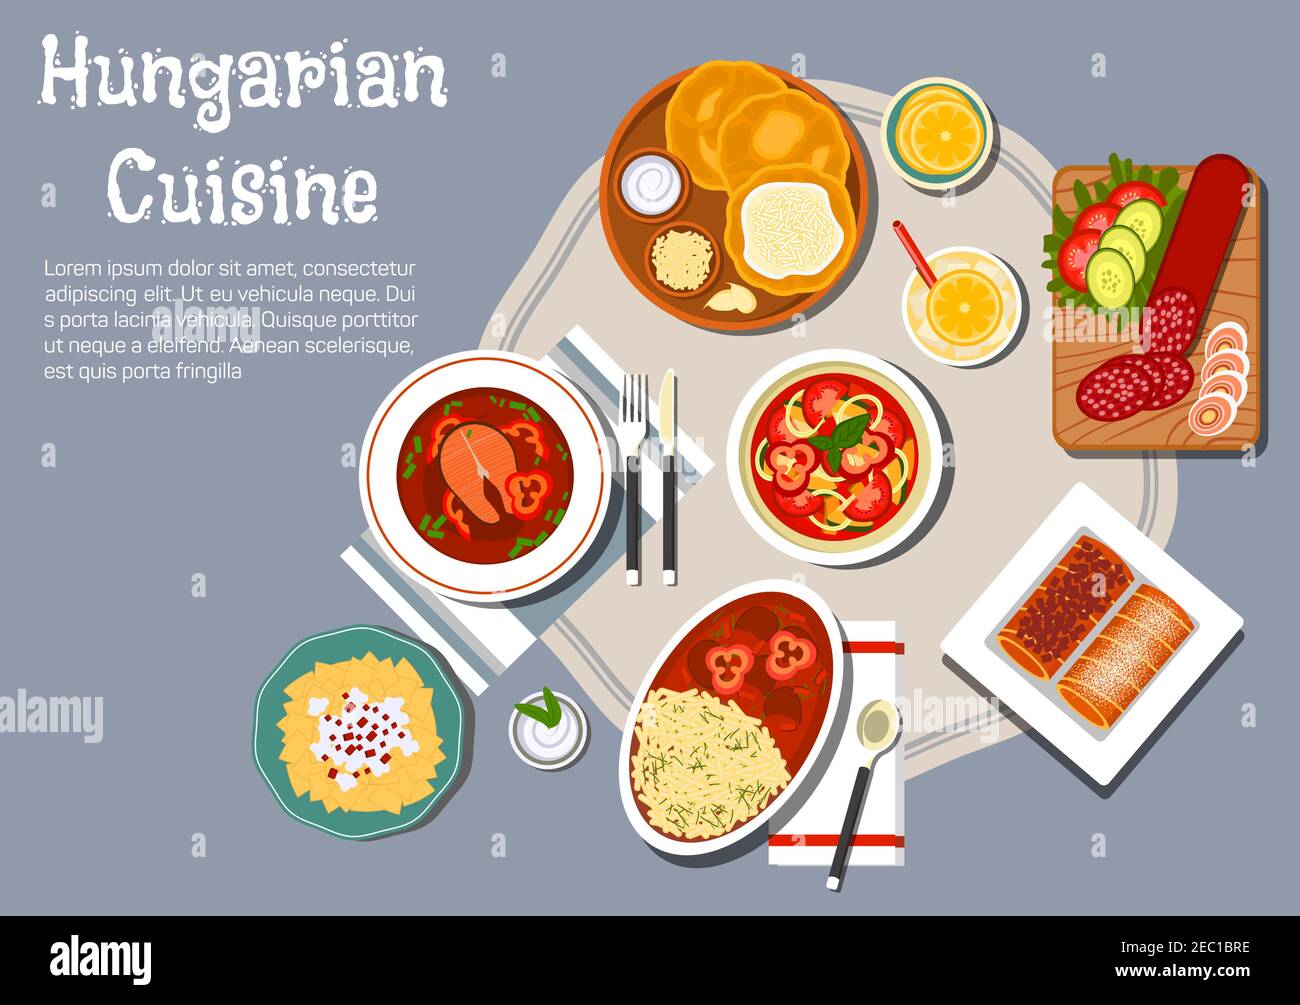 Traditional hungarian cuisine fried bread langos with sour cream and cheese, served with winter salami, egg noodles with cheese and meat stew, spicy f Stock Vector